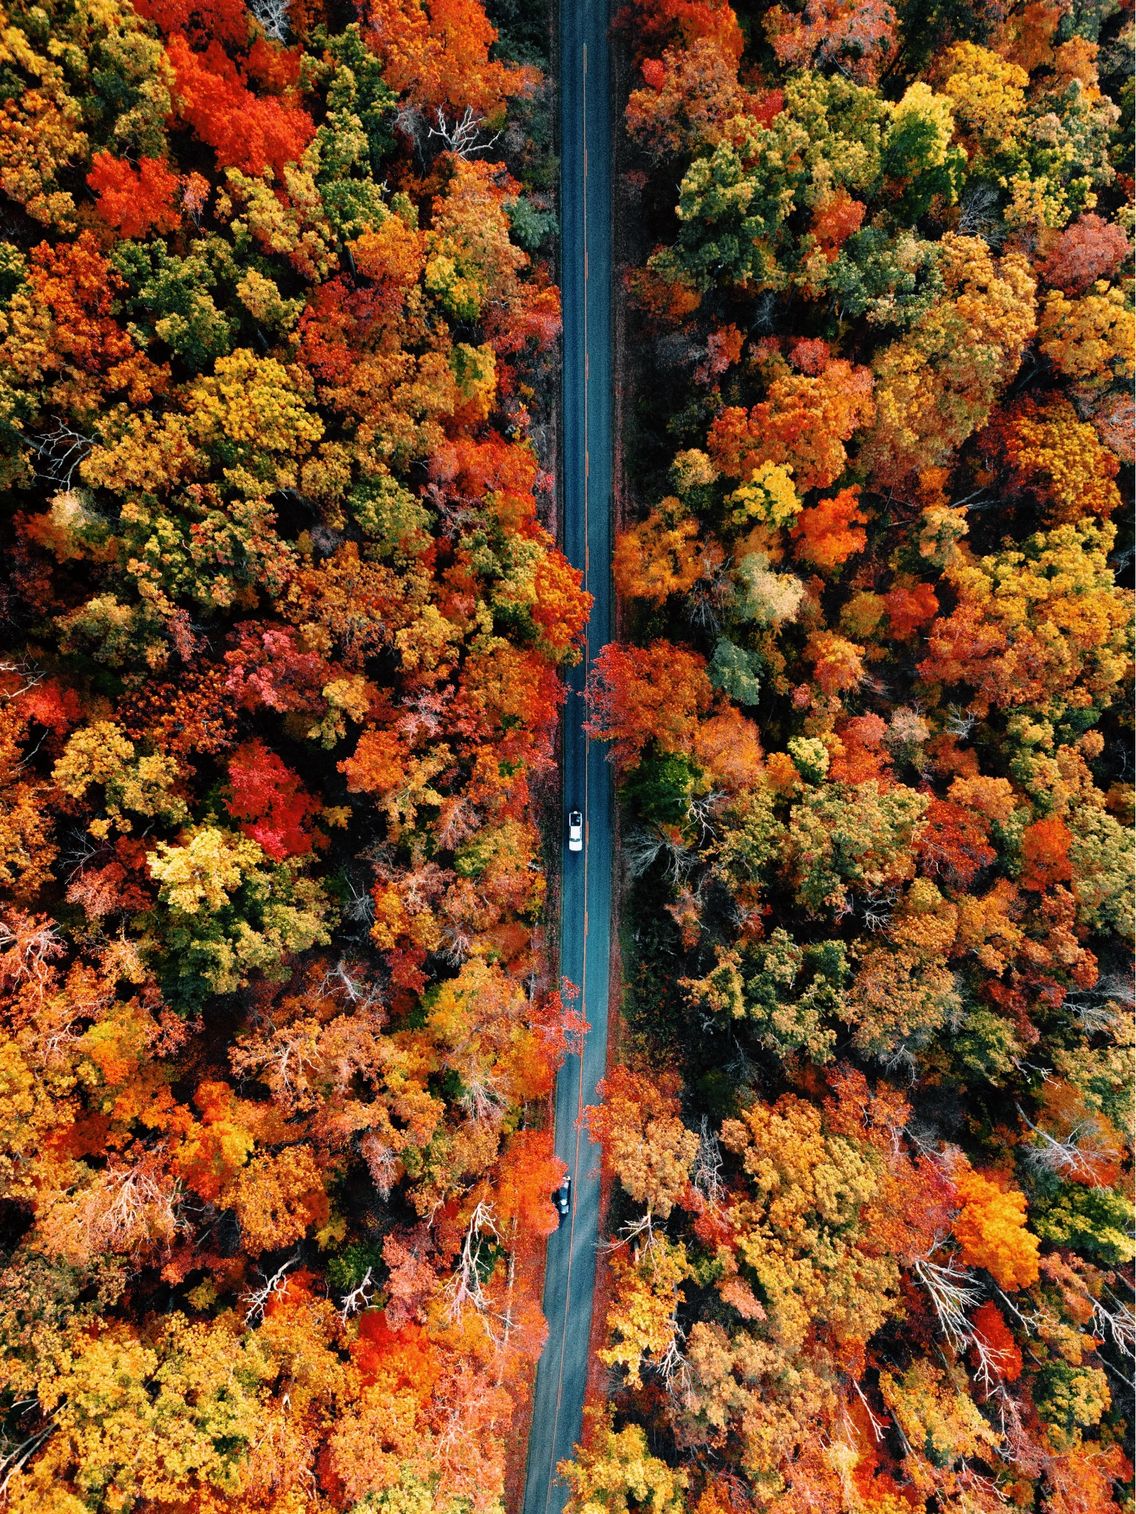 50+ FREE Fall Wallpaper & Autumn Wallpaper Options For Your iPhone